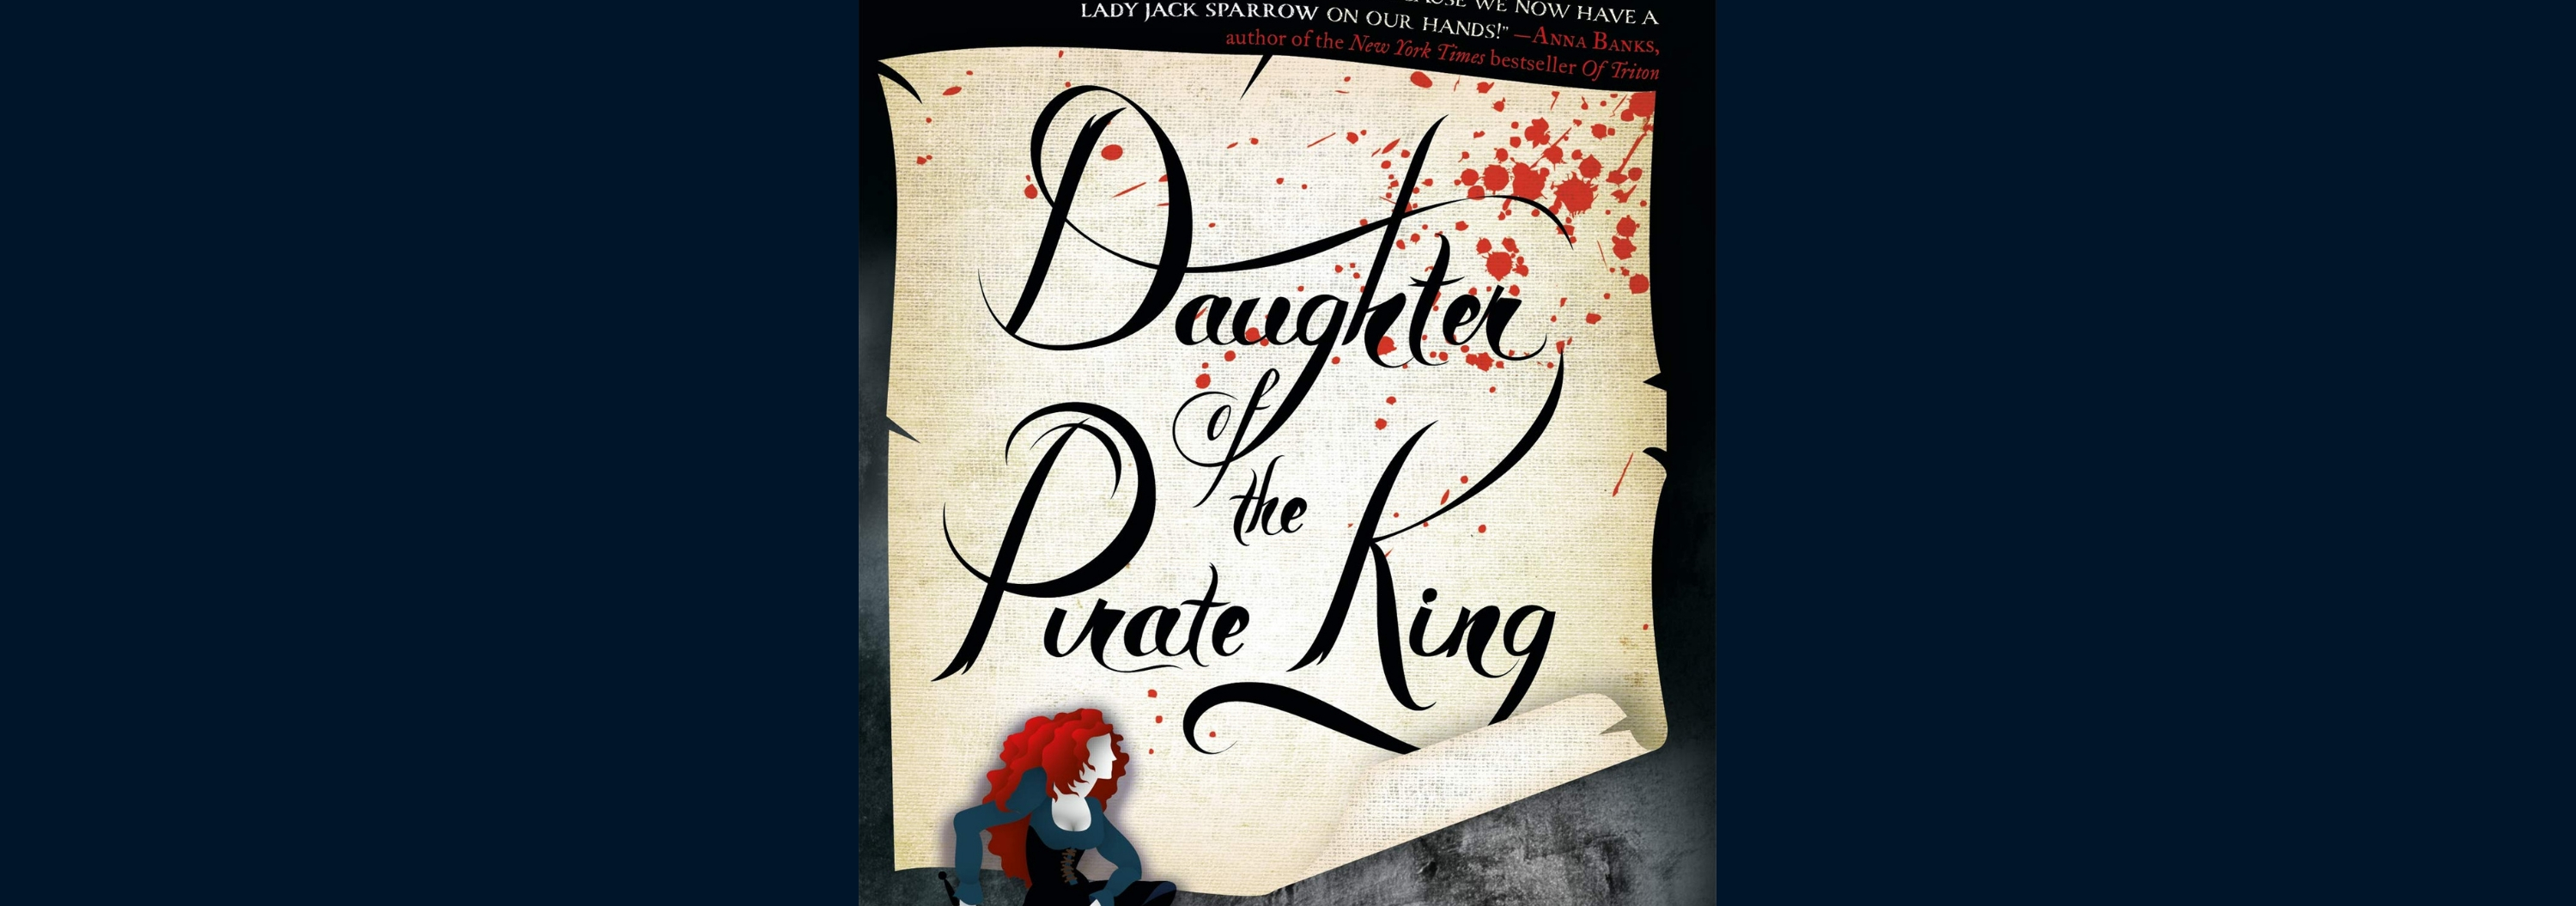 Daughter of the Pirate King (Daughter by Levenseller, Tricia